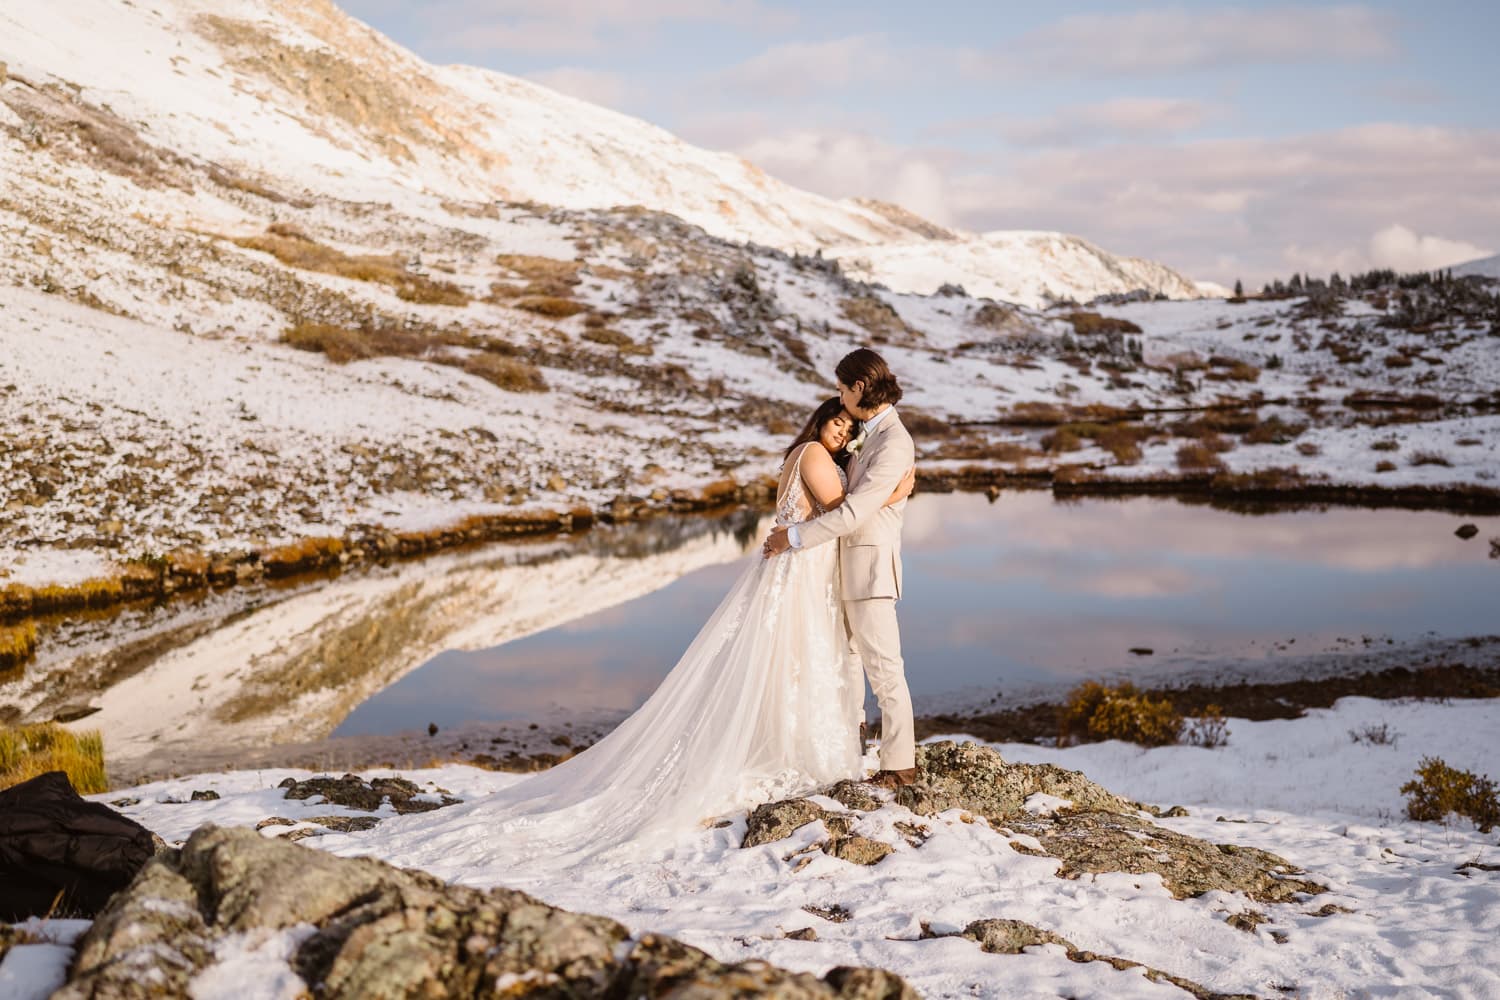 A couple who got married at sunrise in Colorado with an alpine lake in the background.